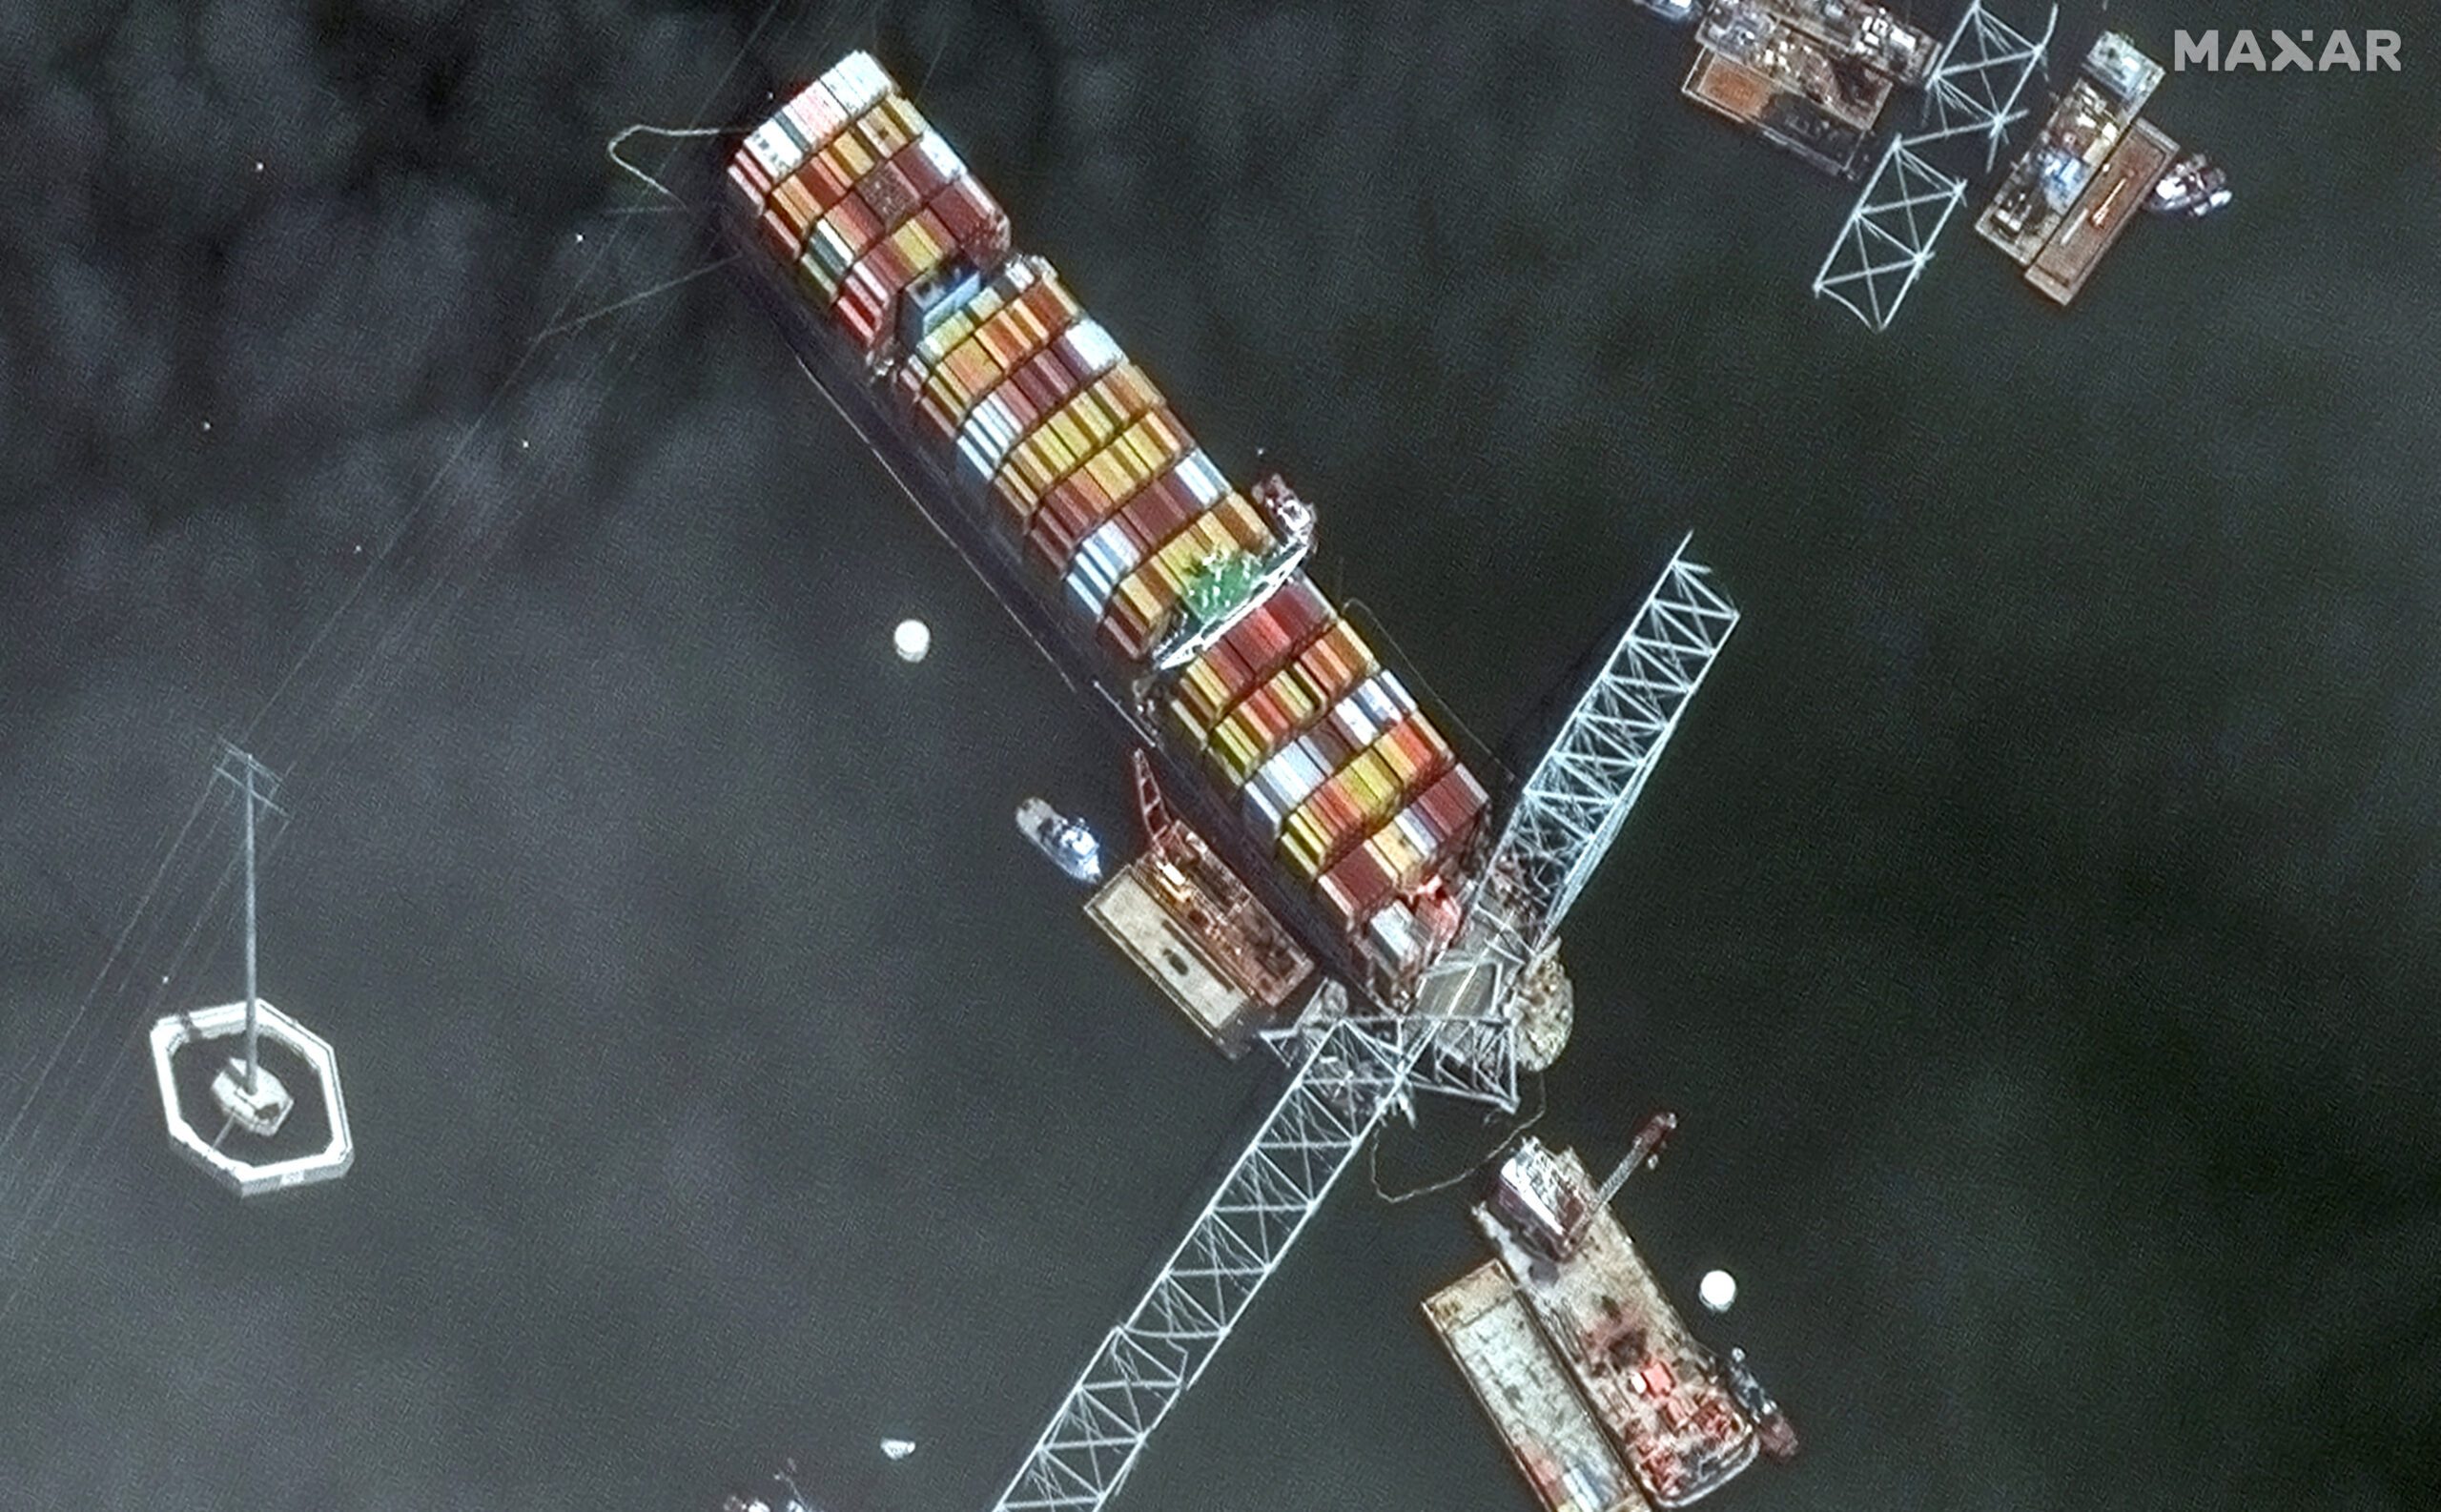 Satellite image shows a closer view of the Dali container ship and a collapsed Francis Scott Key Bridge, in Baltimore, Maryland. Maxar Technologies/Handout via REUTERS